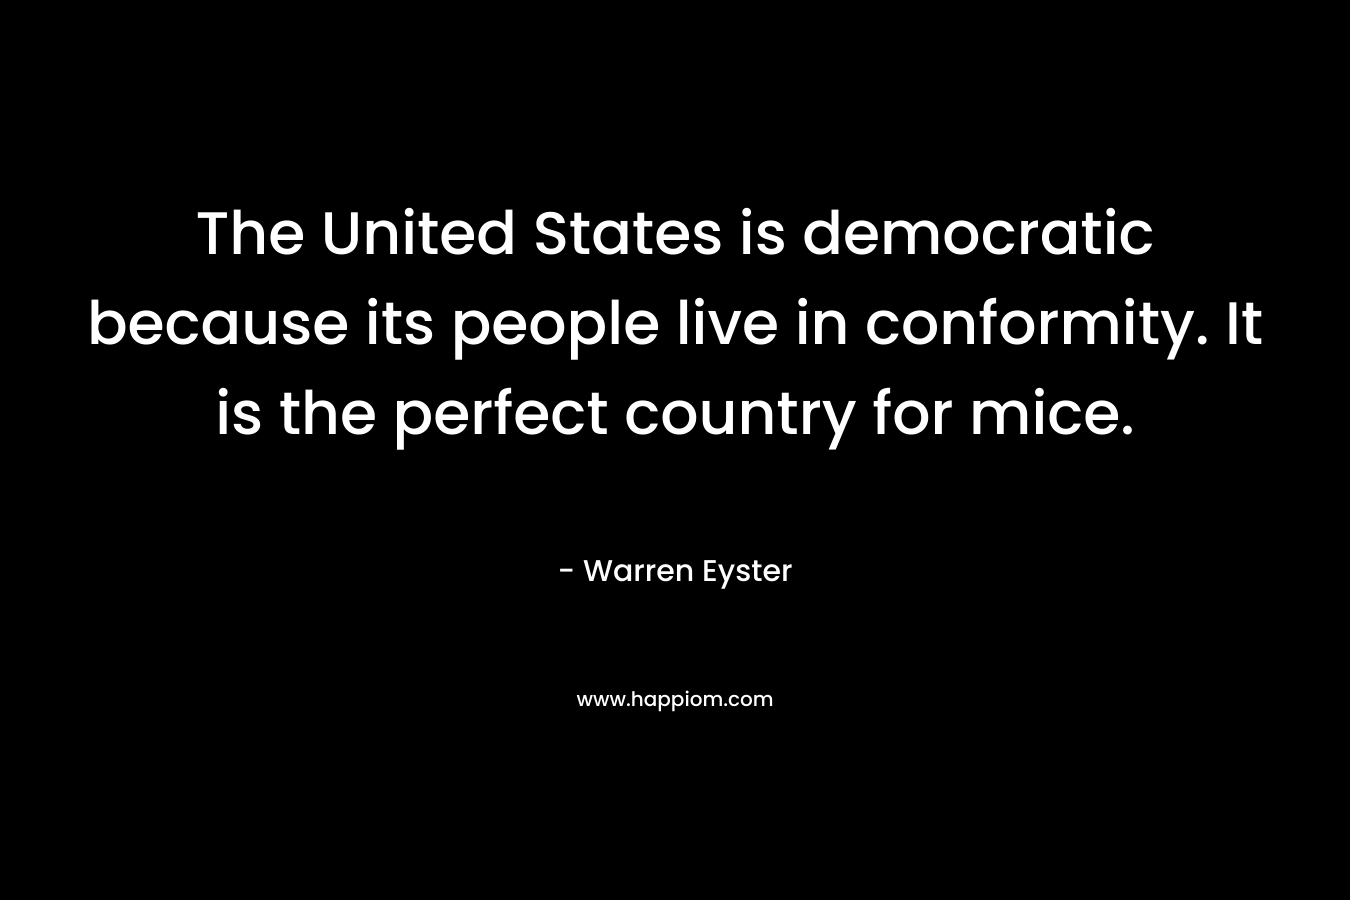 The United States is democratic because its people live in conformity. It is the perfect country for mice. – Warren Eyster